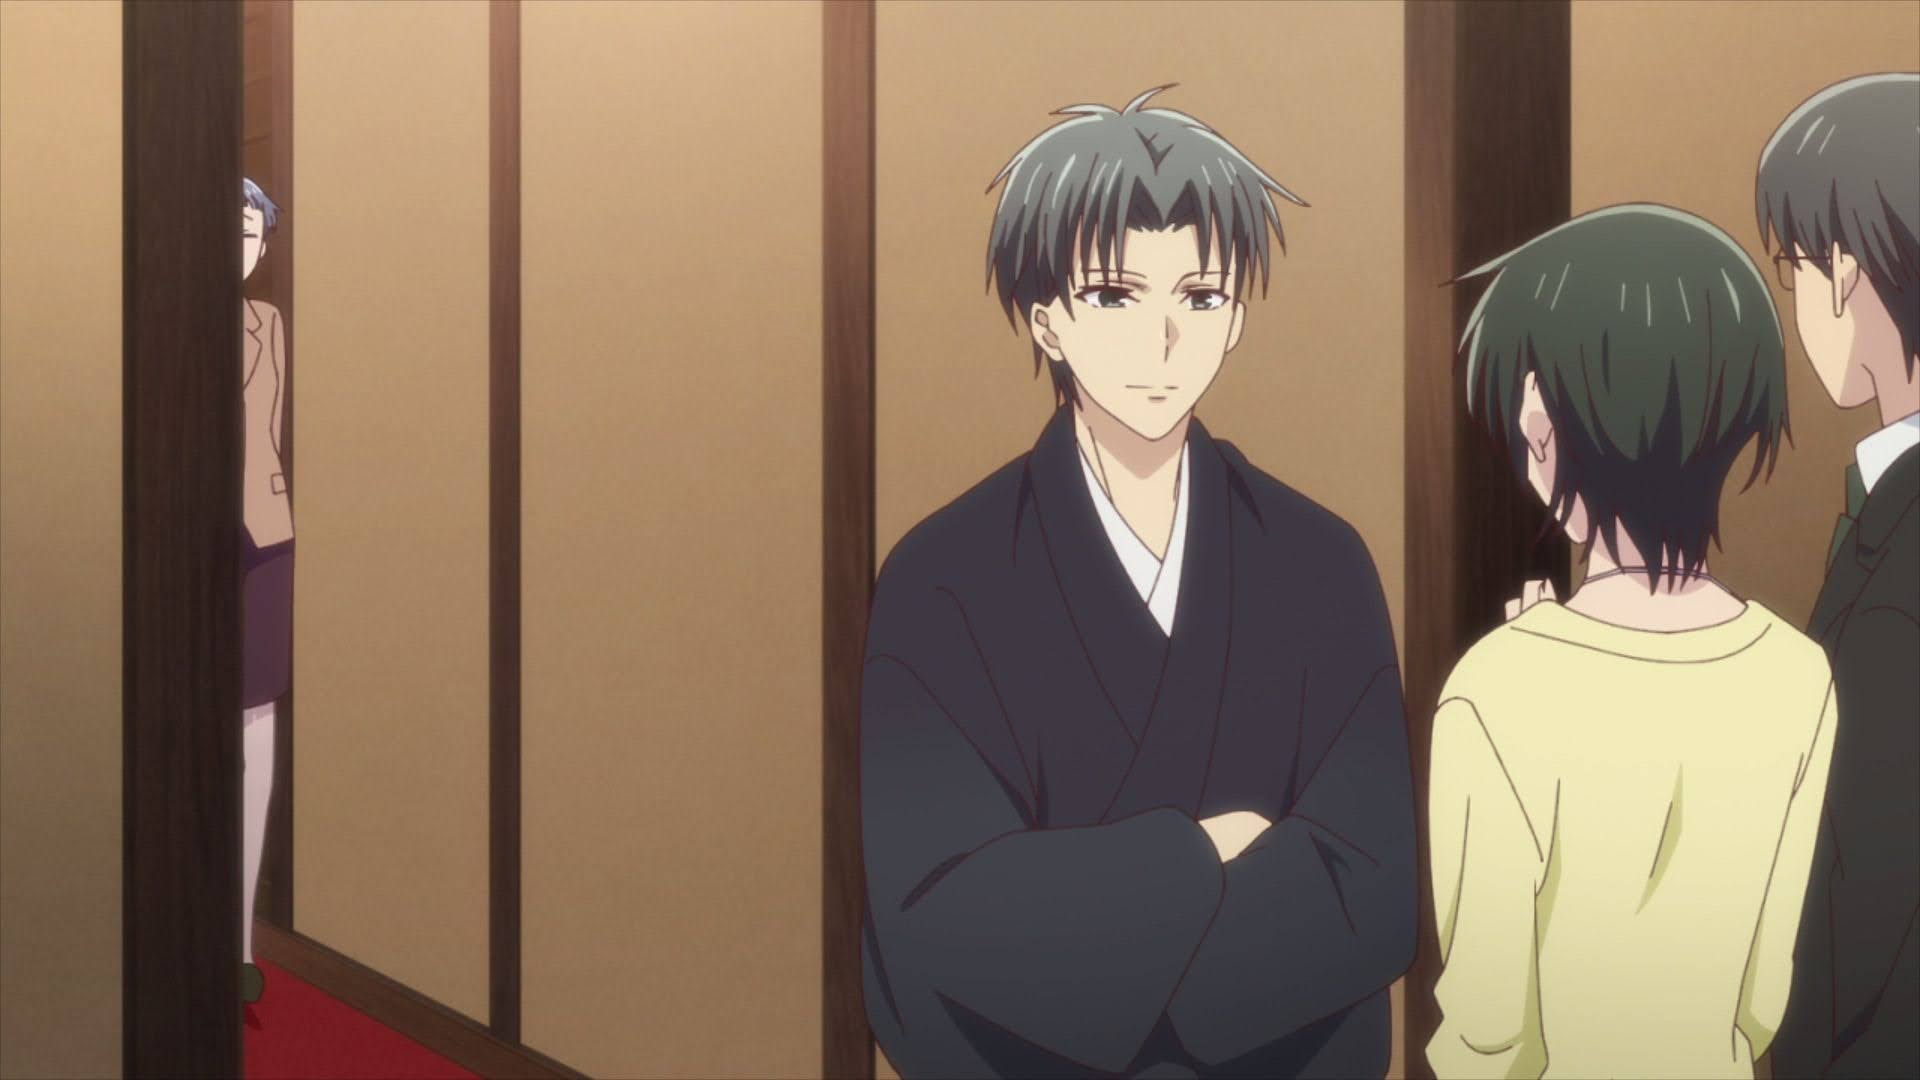 Is Shigure a bad guy in Fruits Basket? - Quora